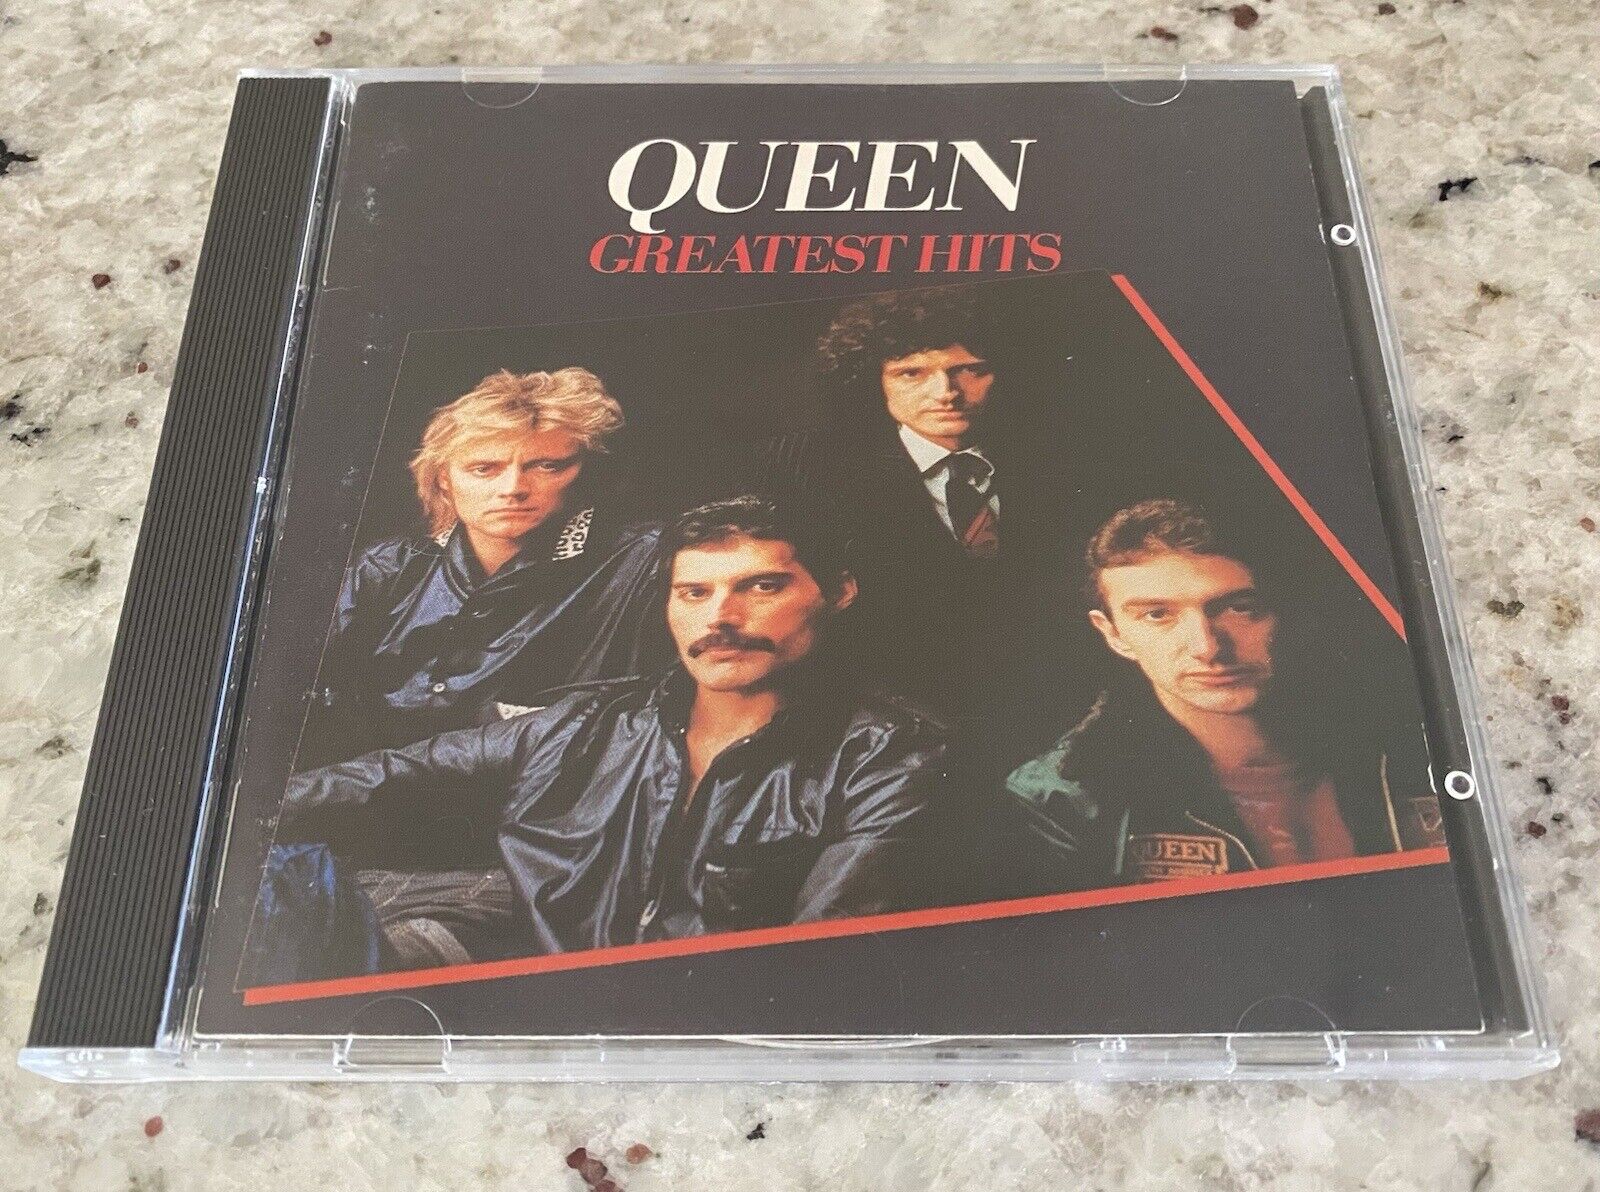 Queen-Greatest Hits 1983 West German Target CD UBER RARE NM Condition